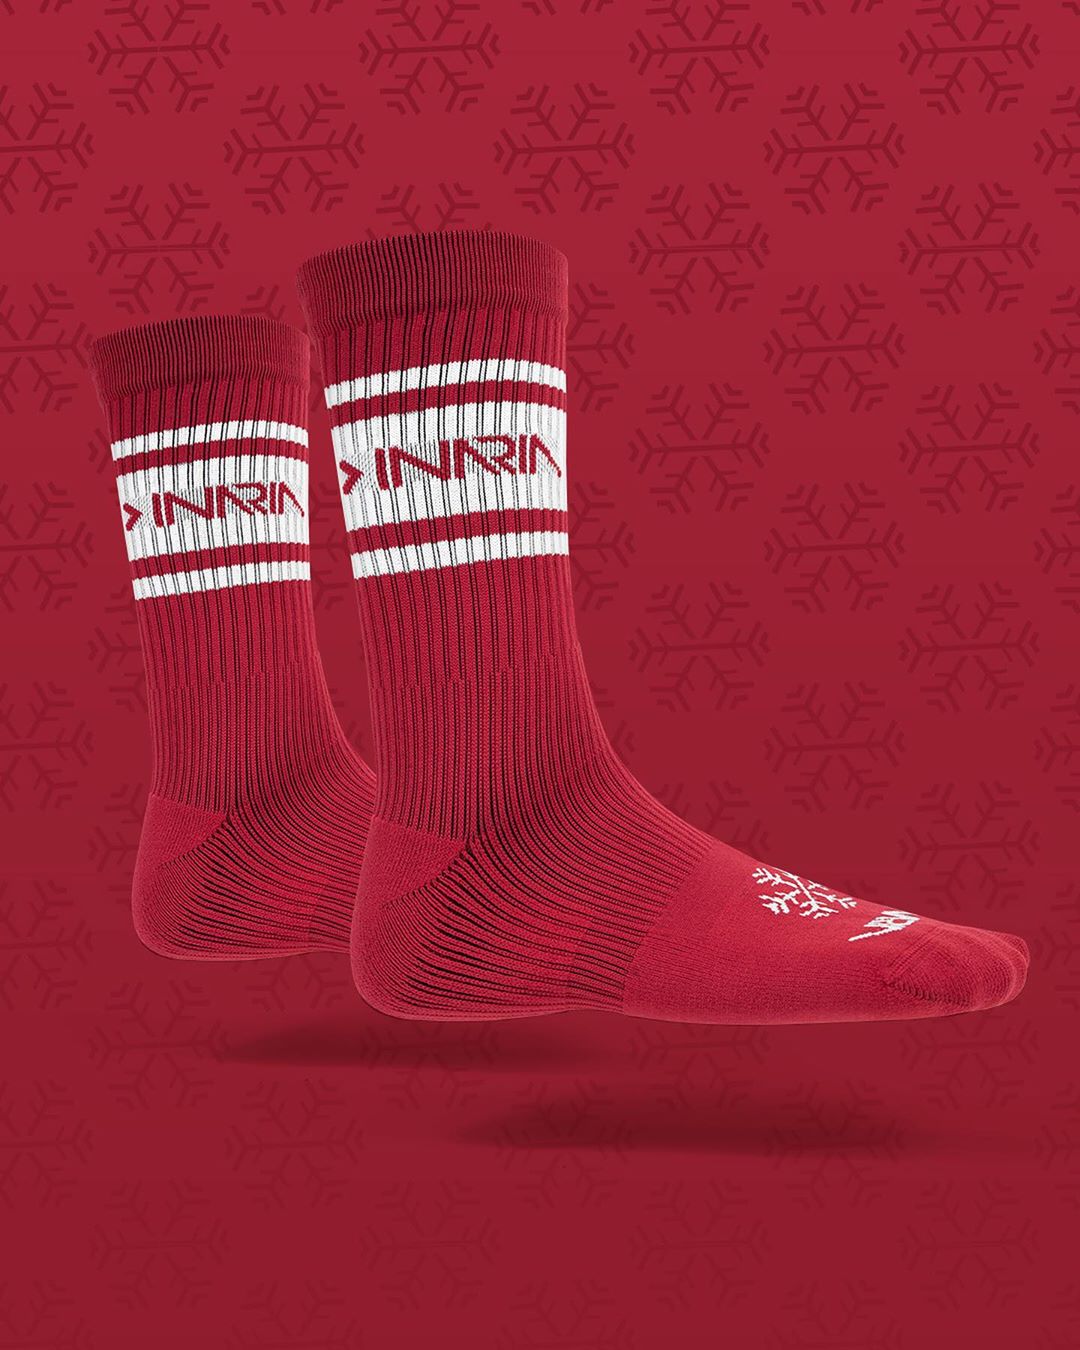 Holiday socks for friends and family…. Holiday Cheer for all #HappyHolidays #inariasoccer